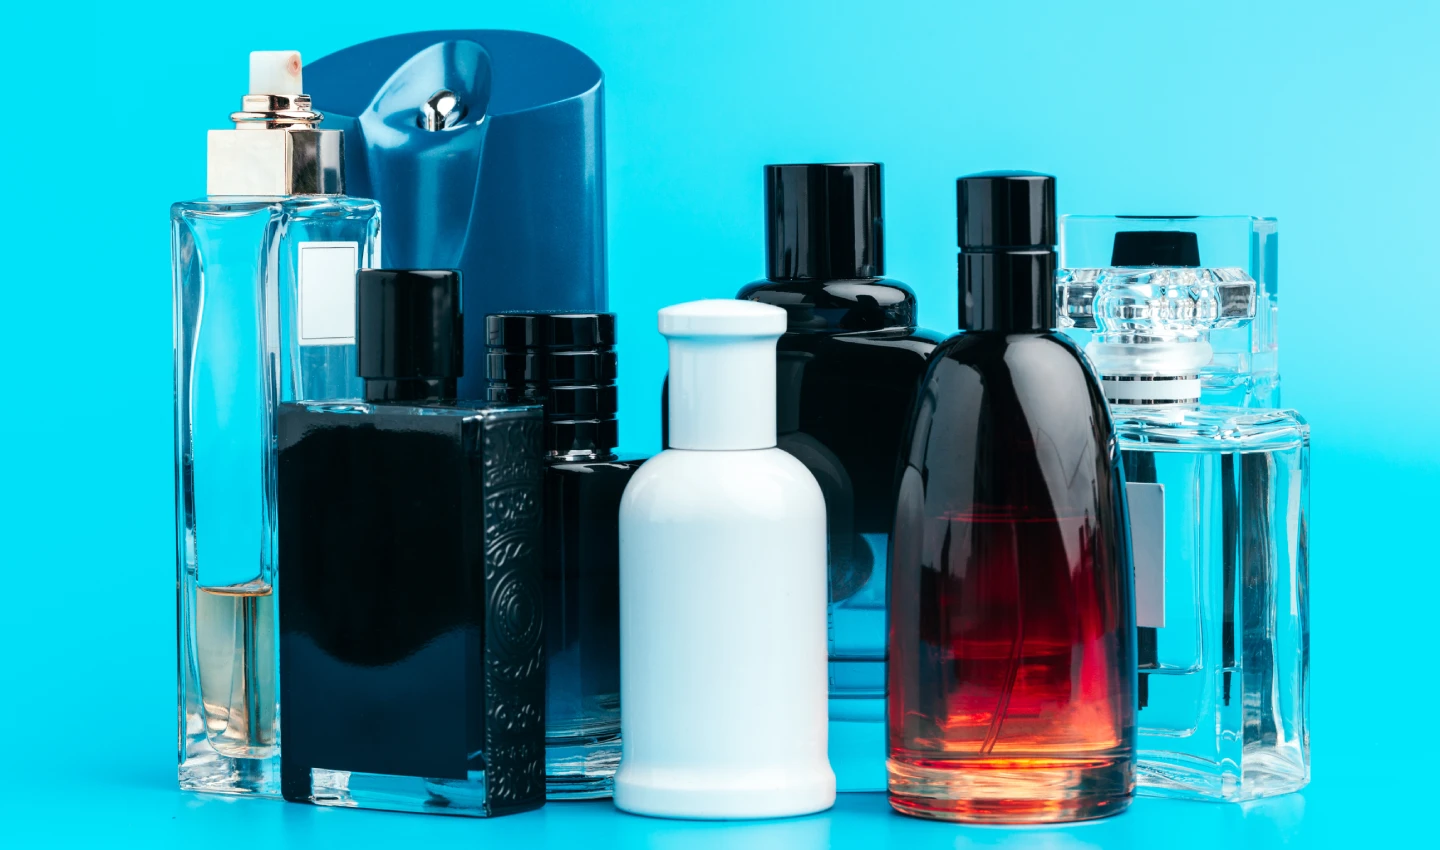 Men's Body Care Scents - An image of various bottles of perfumes and fragrances, showcasing the diversity of scents available for men's body care. From fresh and clean to musky and masculine, there's a scent for every personal style and preference. The image emphasizes the importance of finding the right fragrance to promote well-being and enhance your grooming routine.